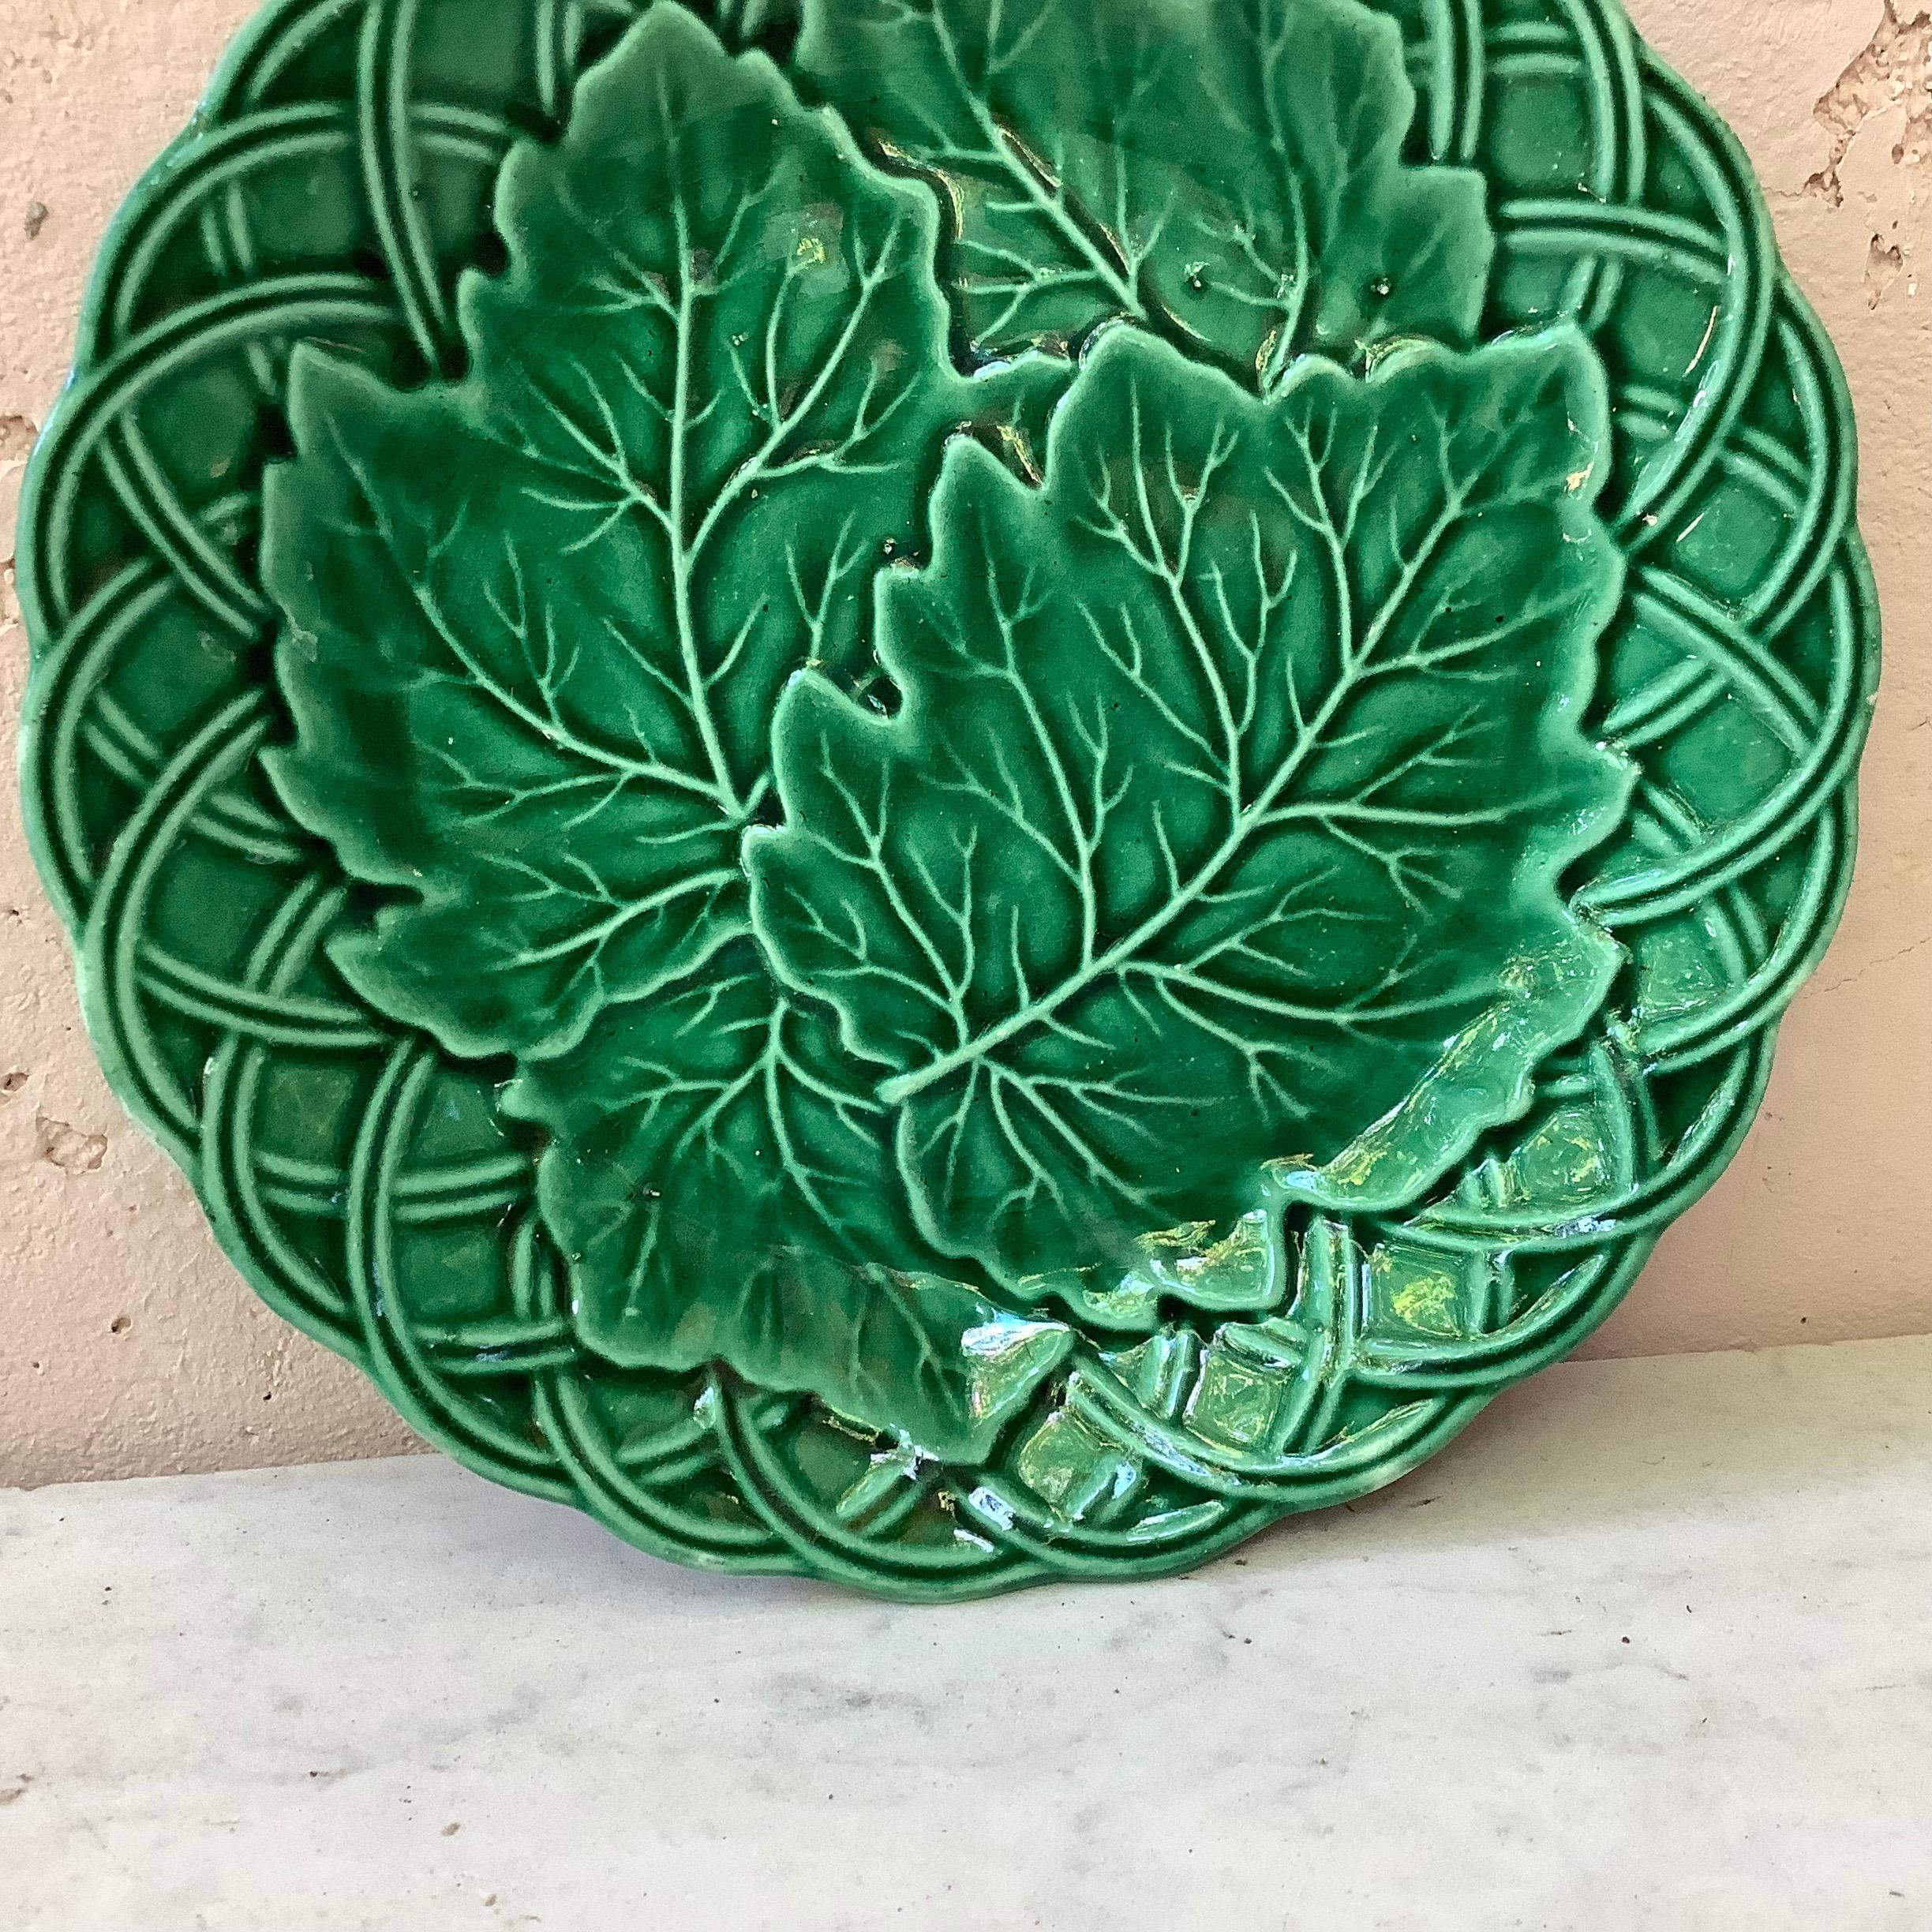 French green Majolica leaves on basket weave background plate, circa 1880.